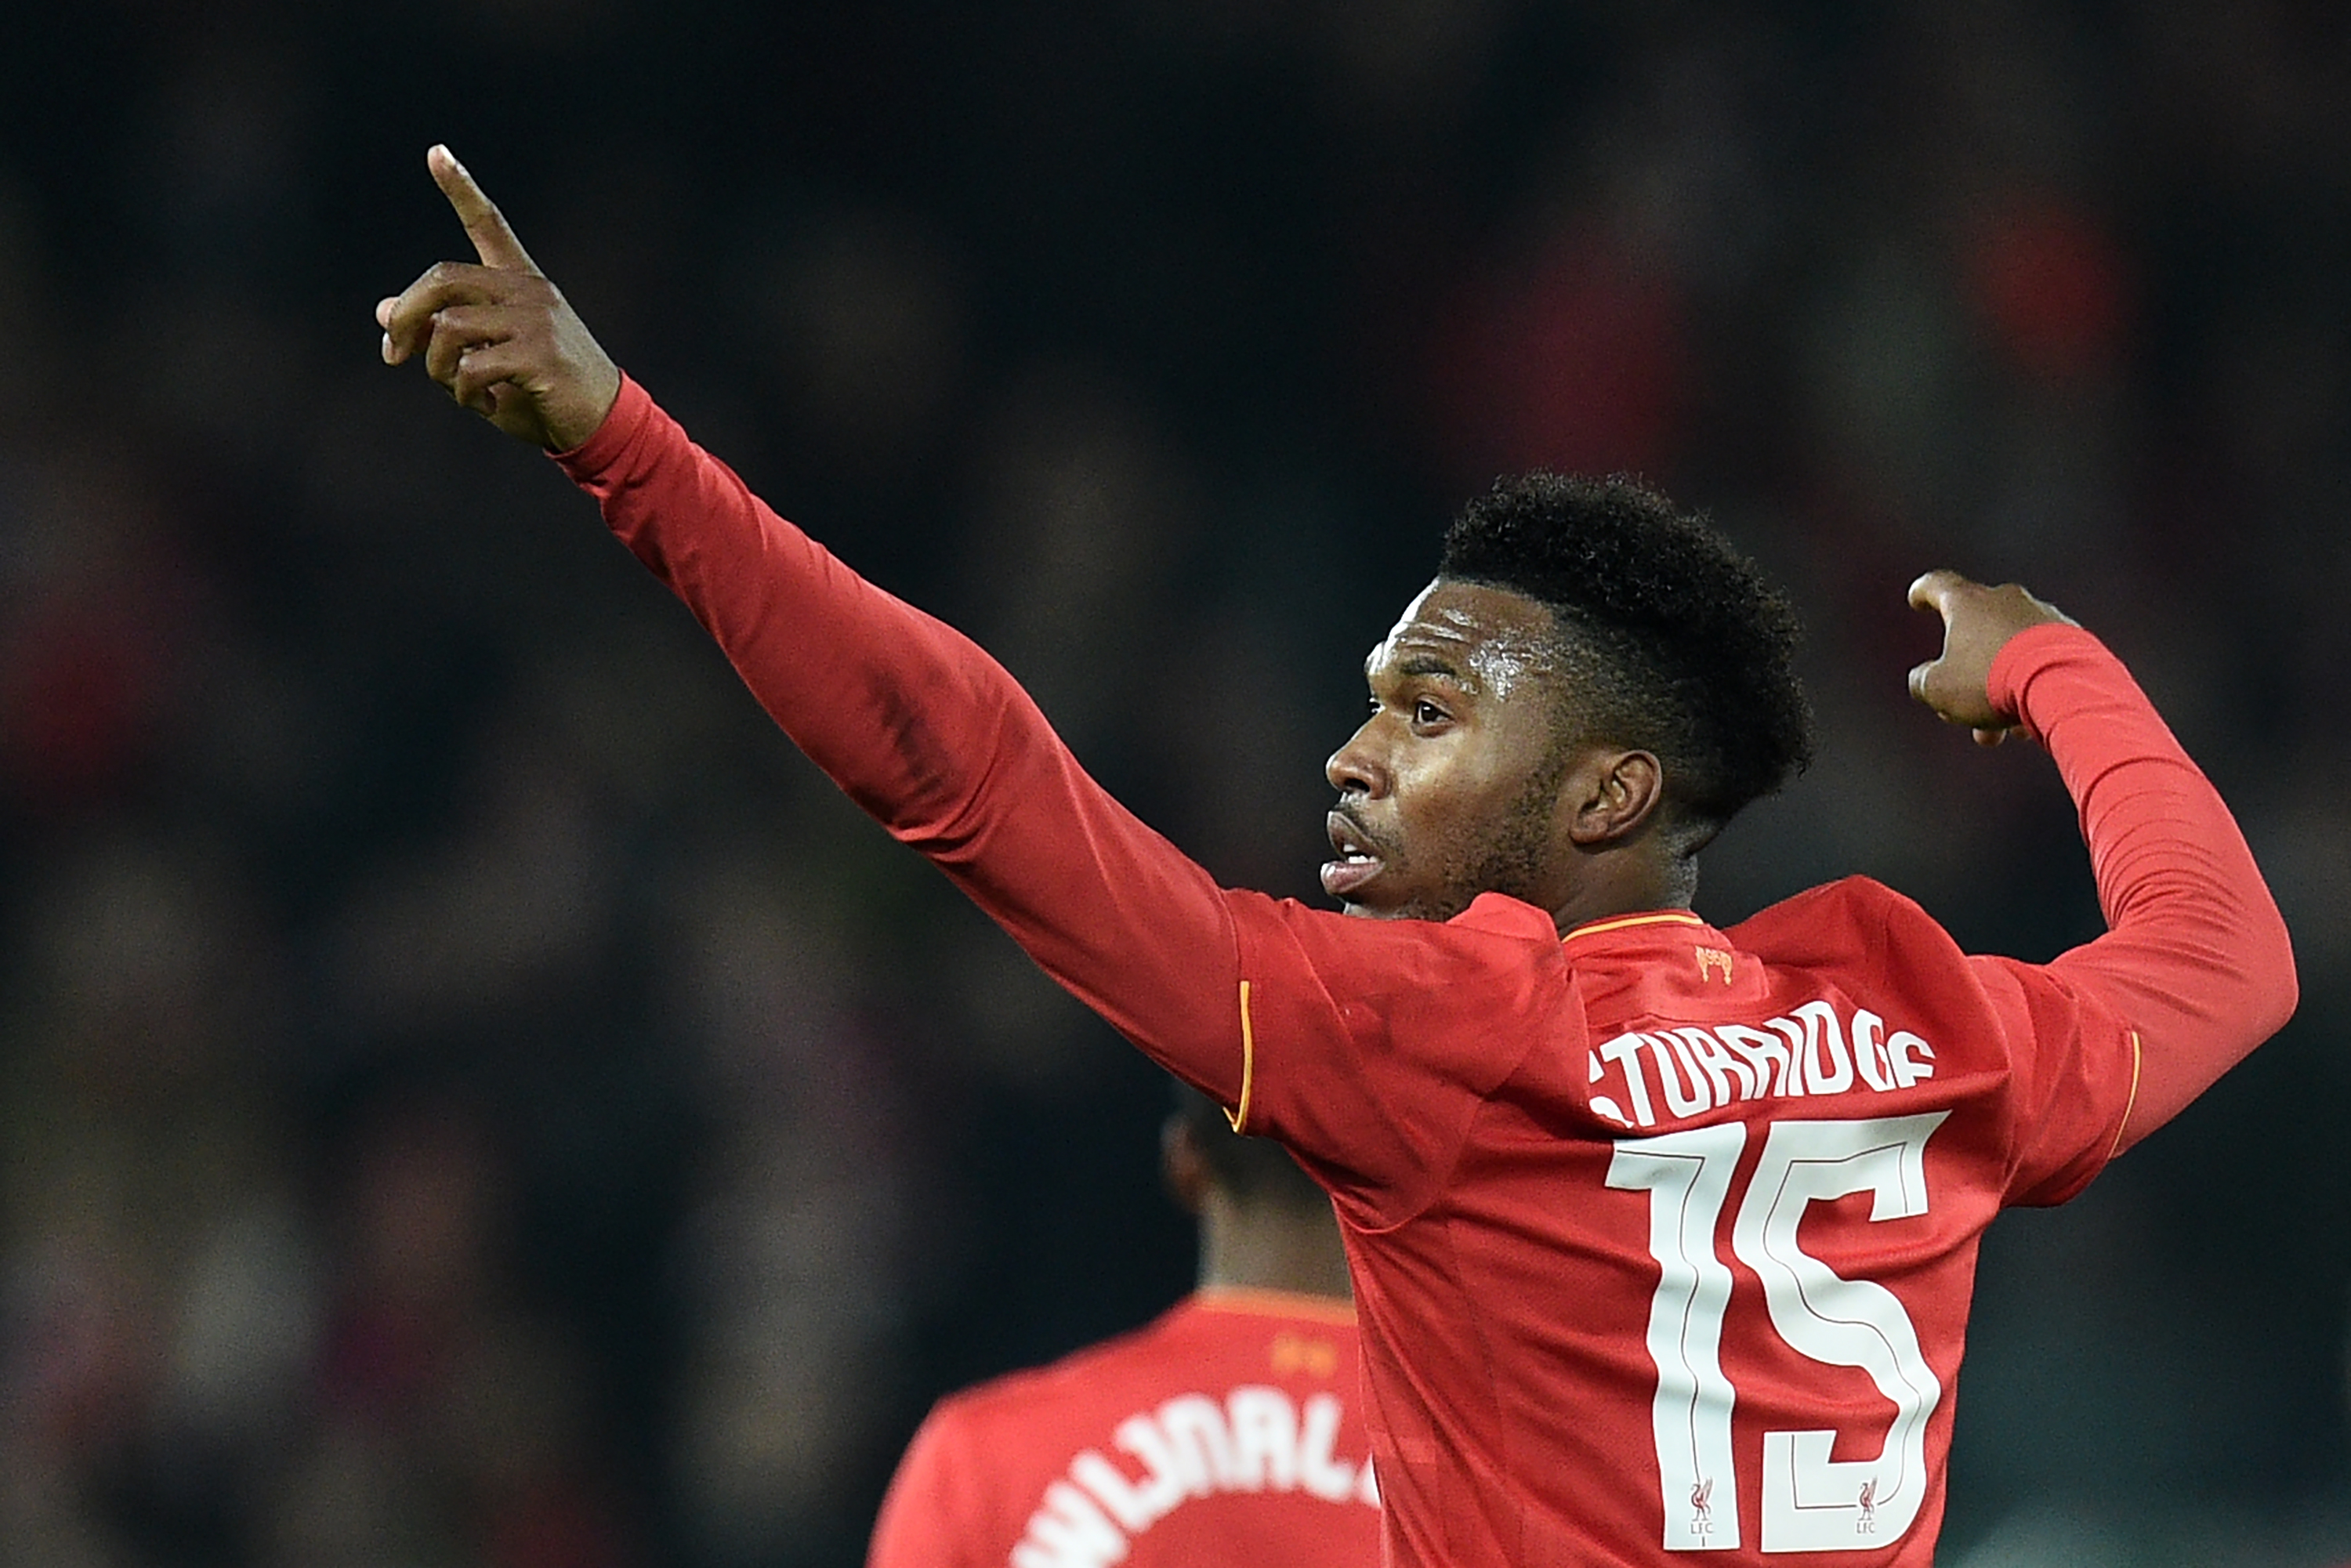 Liverpool's English striker Daniel Sturridge celebrates after scoring their second goal during the EFL (English Football League) Cup fourth round match between Liverpool and Tottenham Hotspur at Anfield in Liverpool north west England on October 25, 2016. / AFP / Oli SCARFF / RESTRICTED TO EDITORIAL USE. No use with unauthorized audio, video, data, fixture lists, club/league logos or 'live' services. Online in-match use limited to 75 images, no video emulation. No use in betting, games or single club/league/player publications.  /         (Photo credit should read OLI SCARFF/AFP/Getty Images)